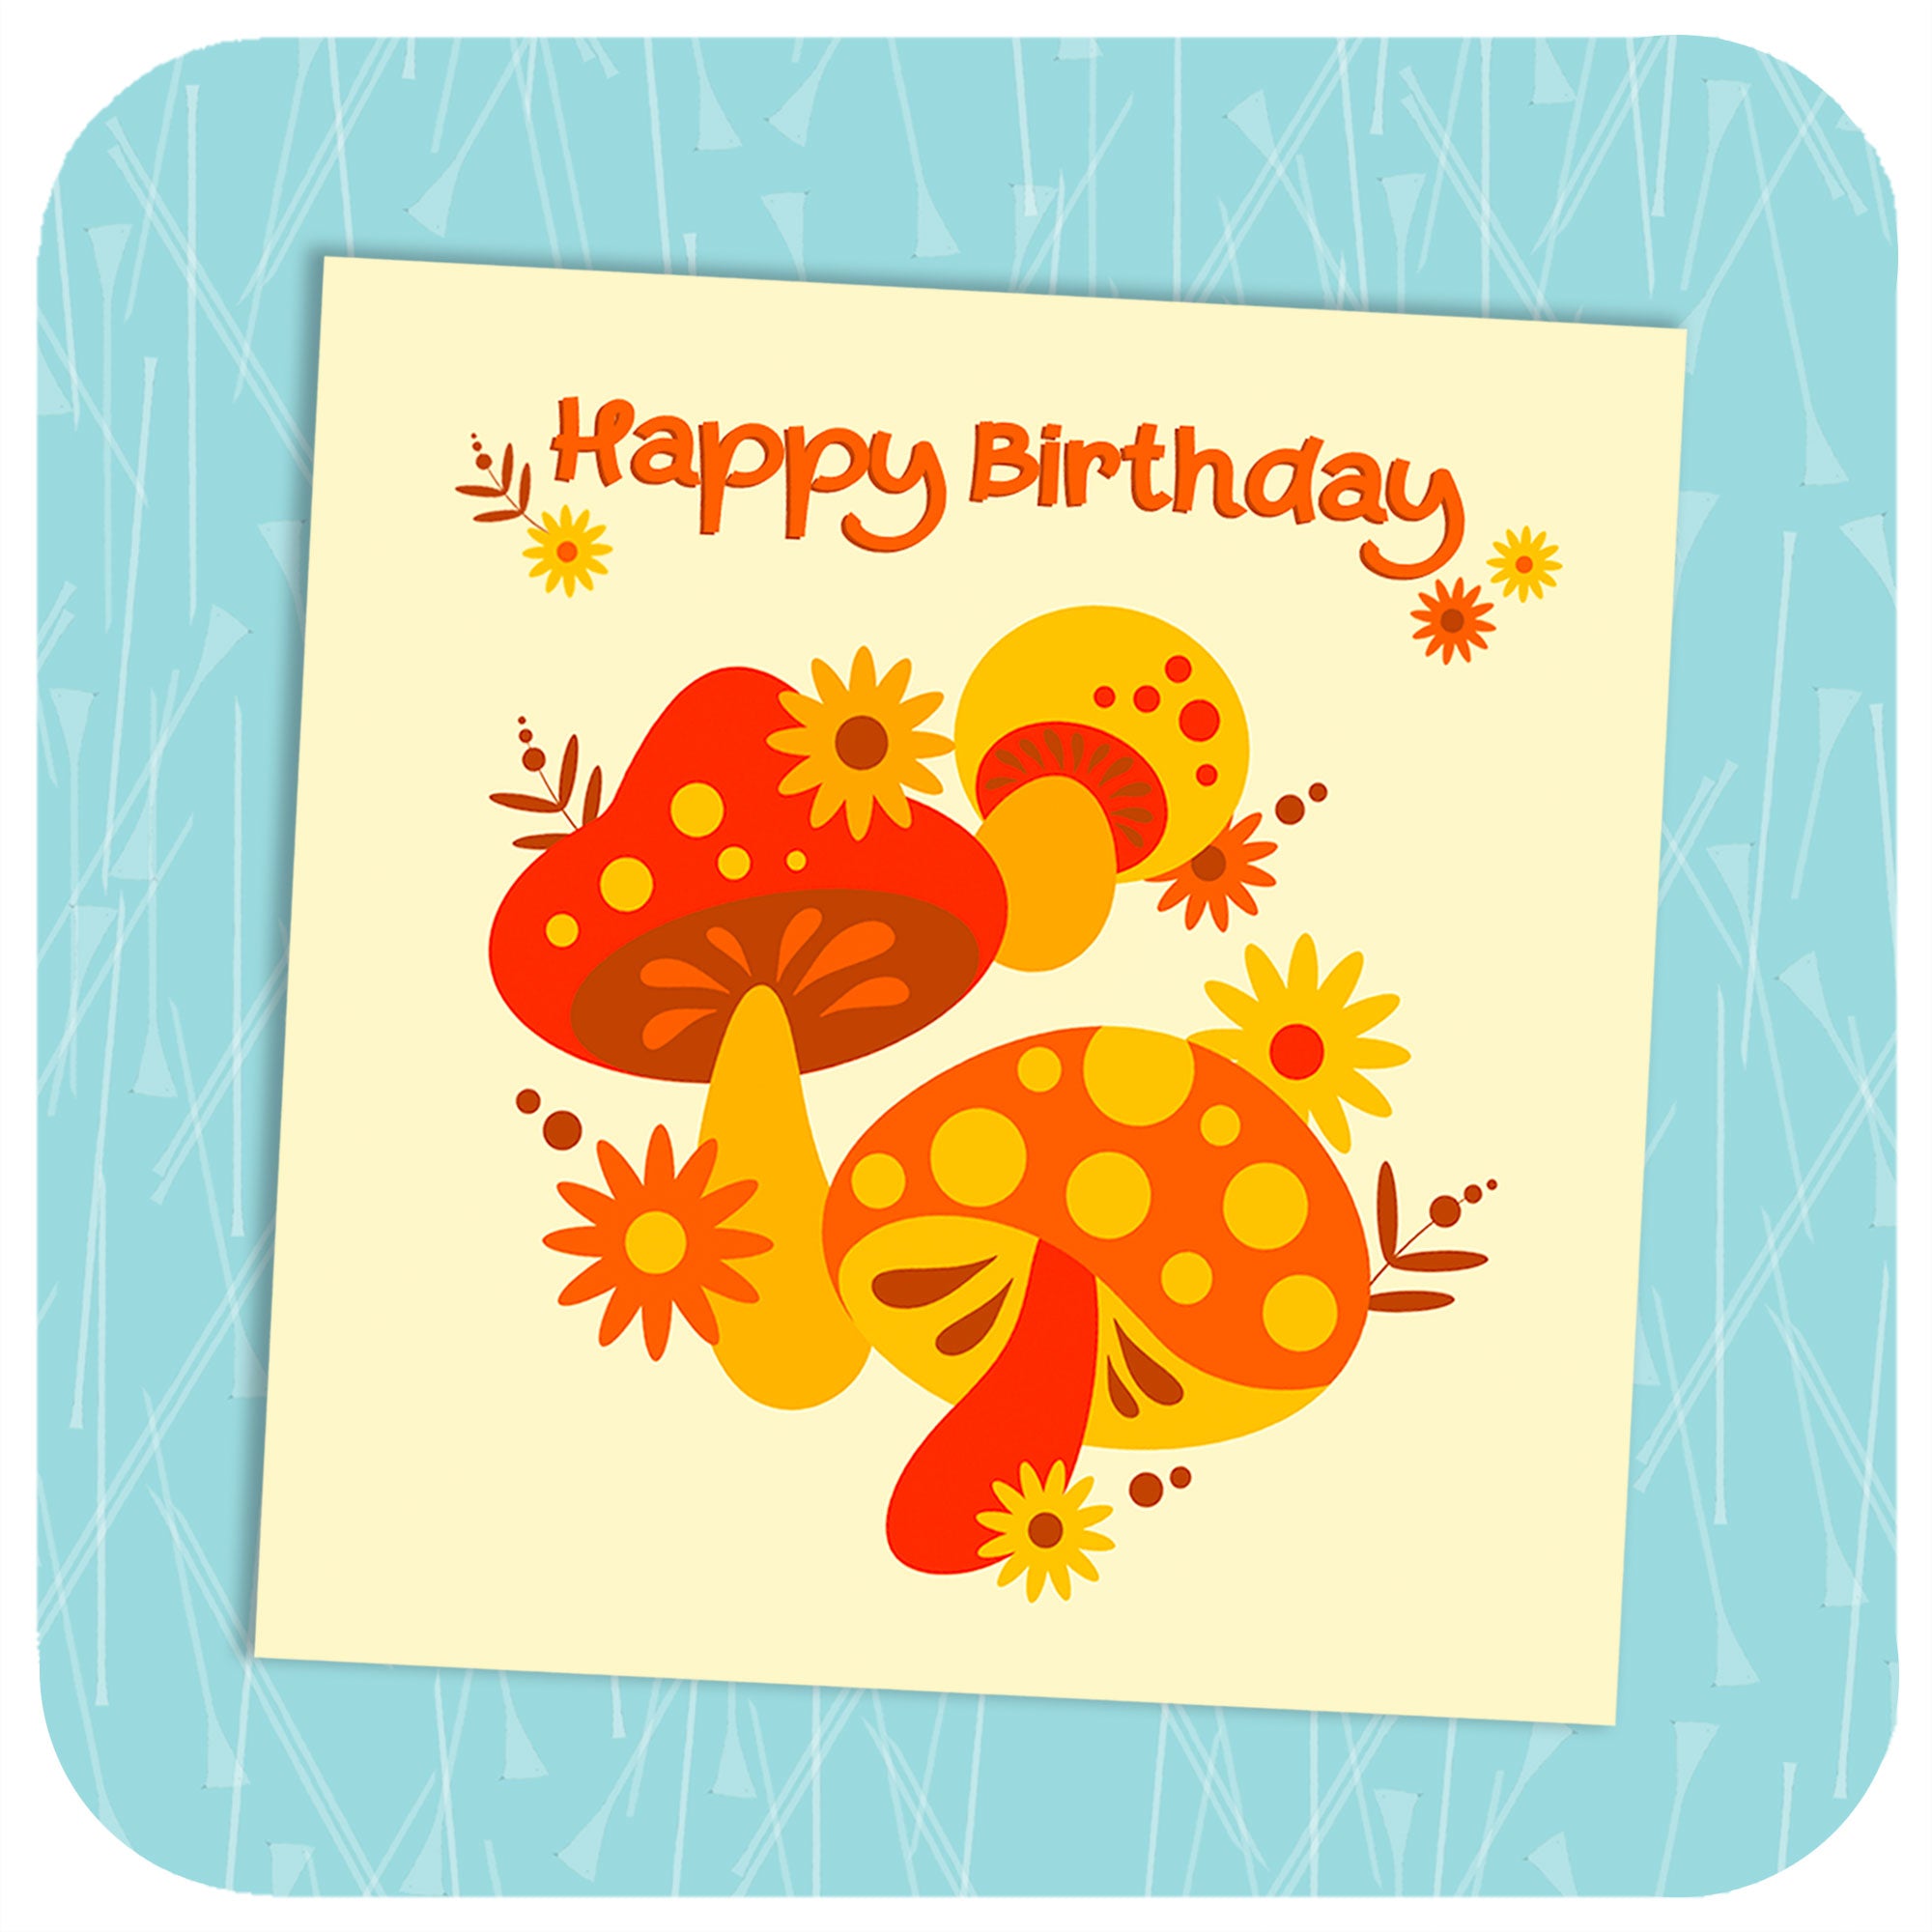 70s Mushrooms Birthday Card Artwork on a patterned blue background | The Inkabilly Emporium